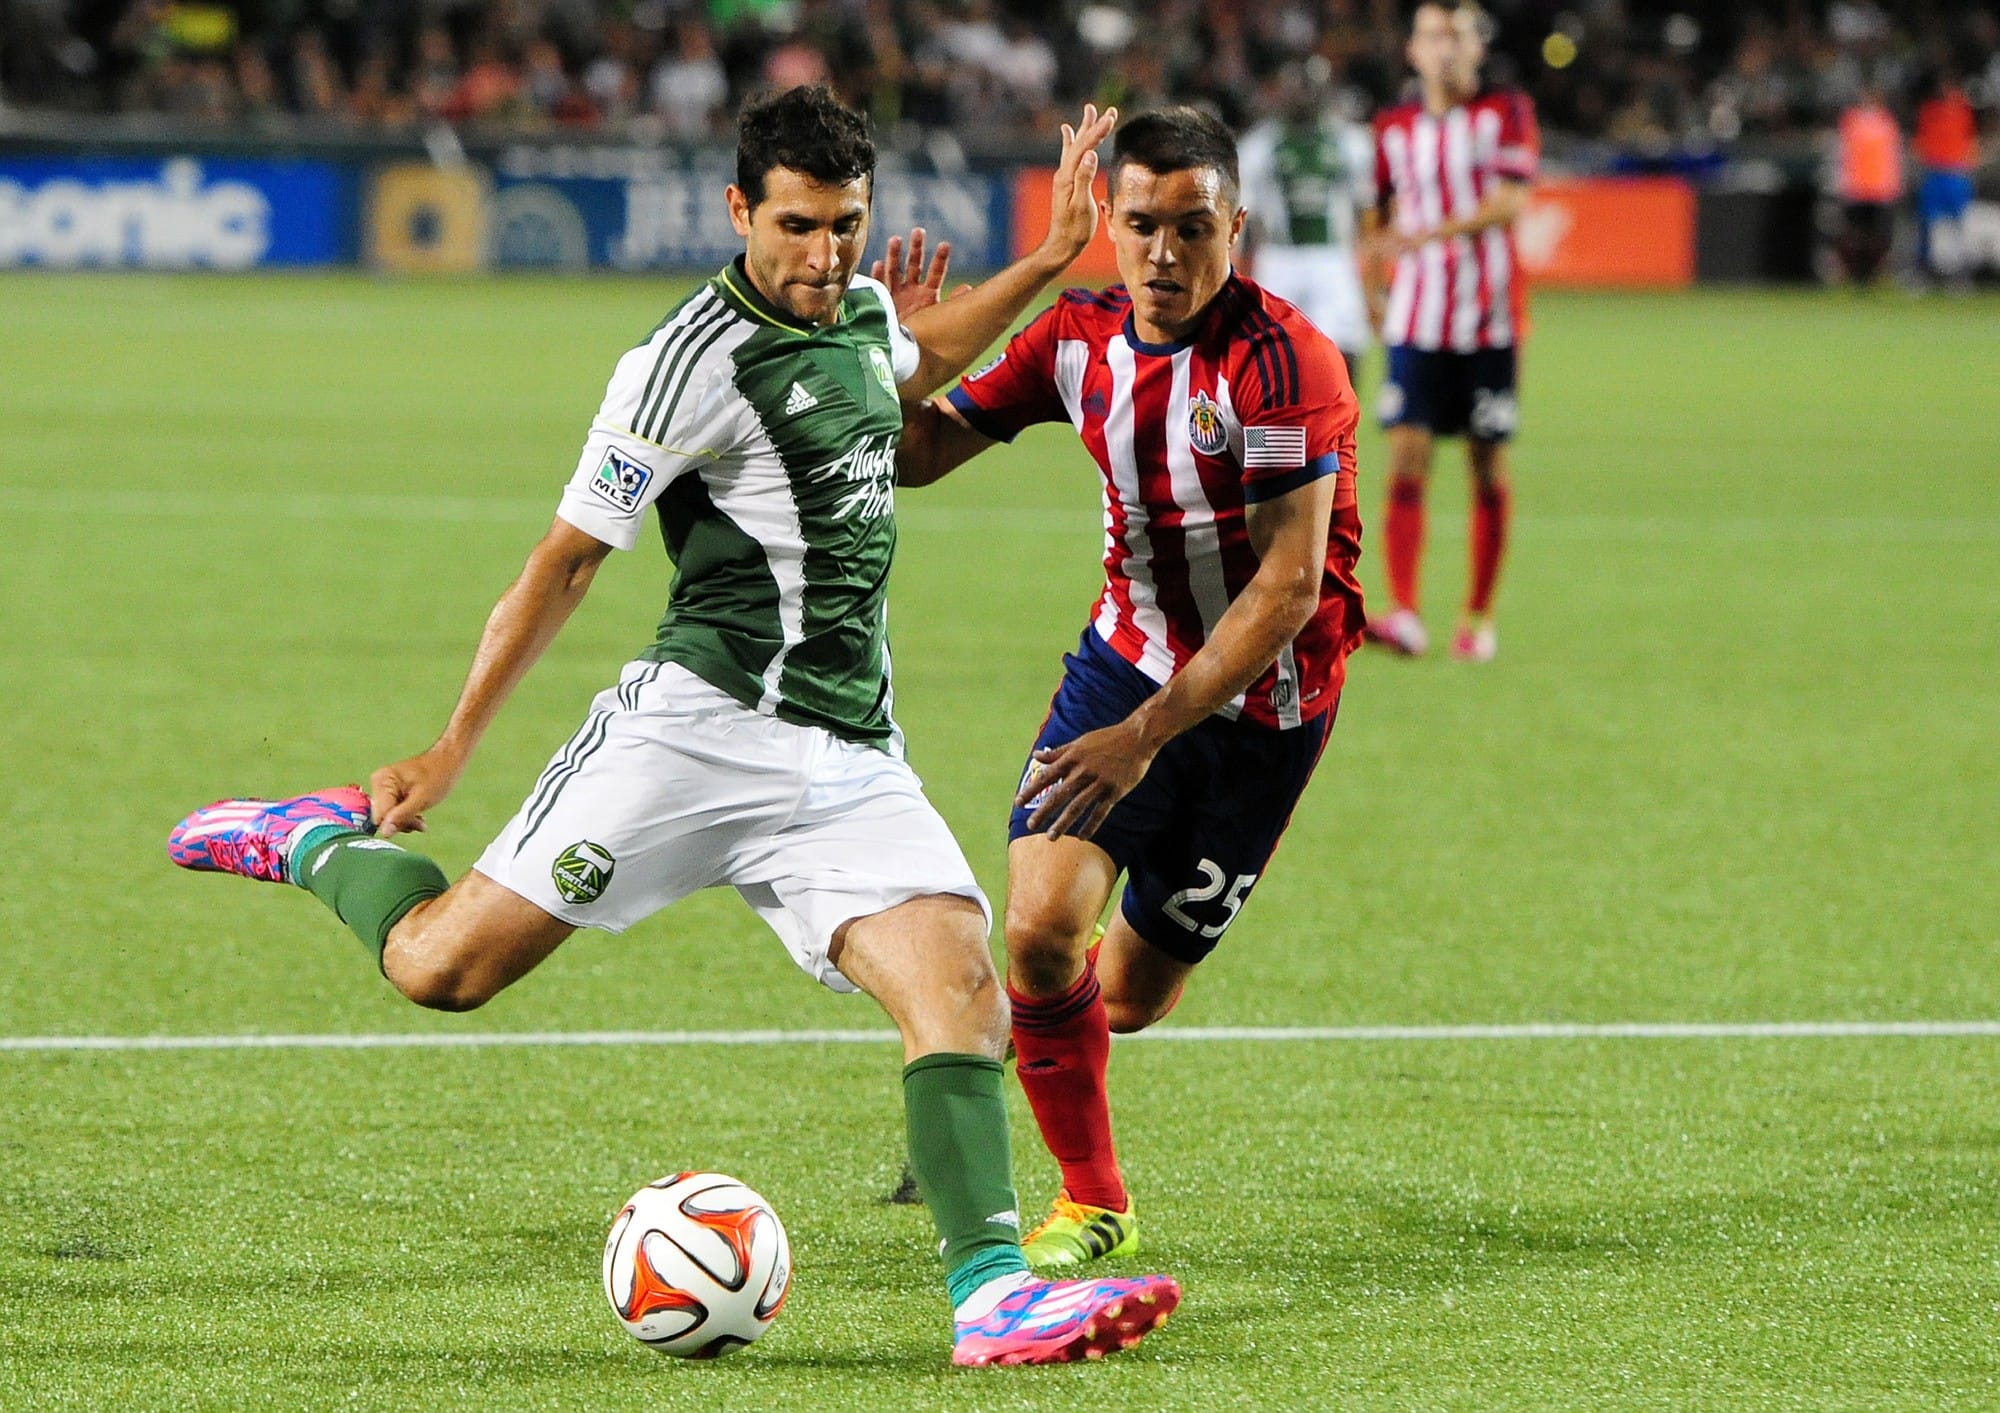 Portland Timbers midfielder Diego Valeri, left,puts a shot on goal as Chivas USA defender Donny Toia closes in during the second half of an MLS soccer game in Portland, Ore., Saturday, Aug. 9, 2014.